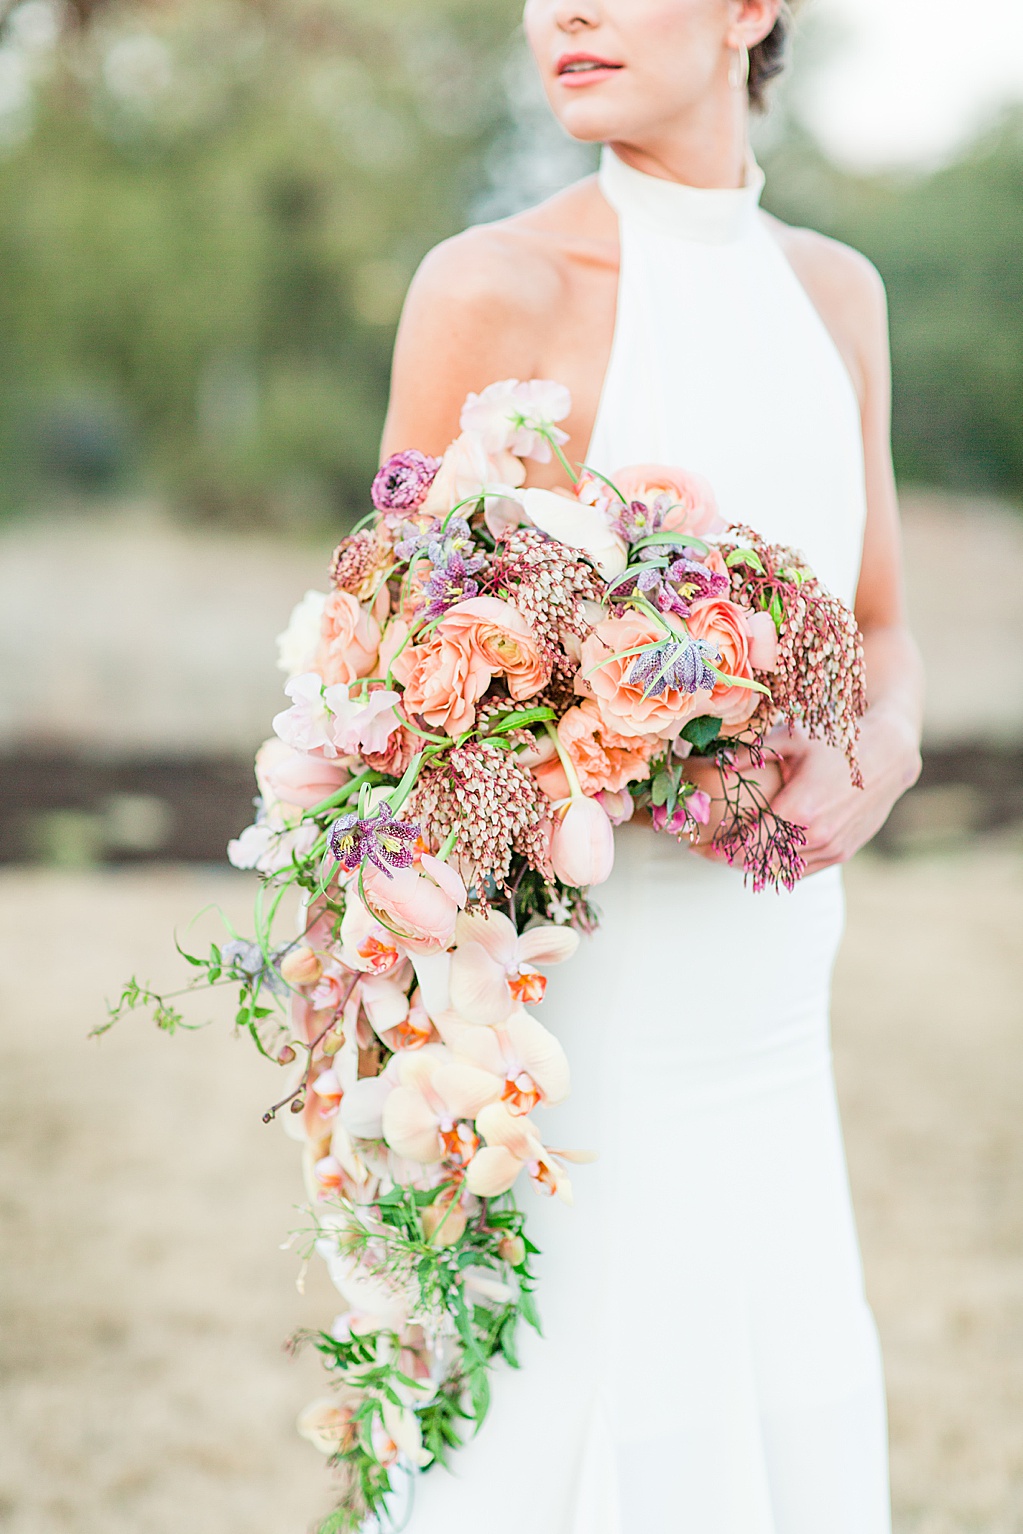 Blush mauve peach and coral wedding inspiration at Prospect House in Dripping Springs Texas wedding venue by Allison Jeffers Photography 0046